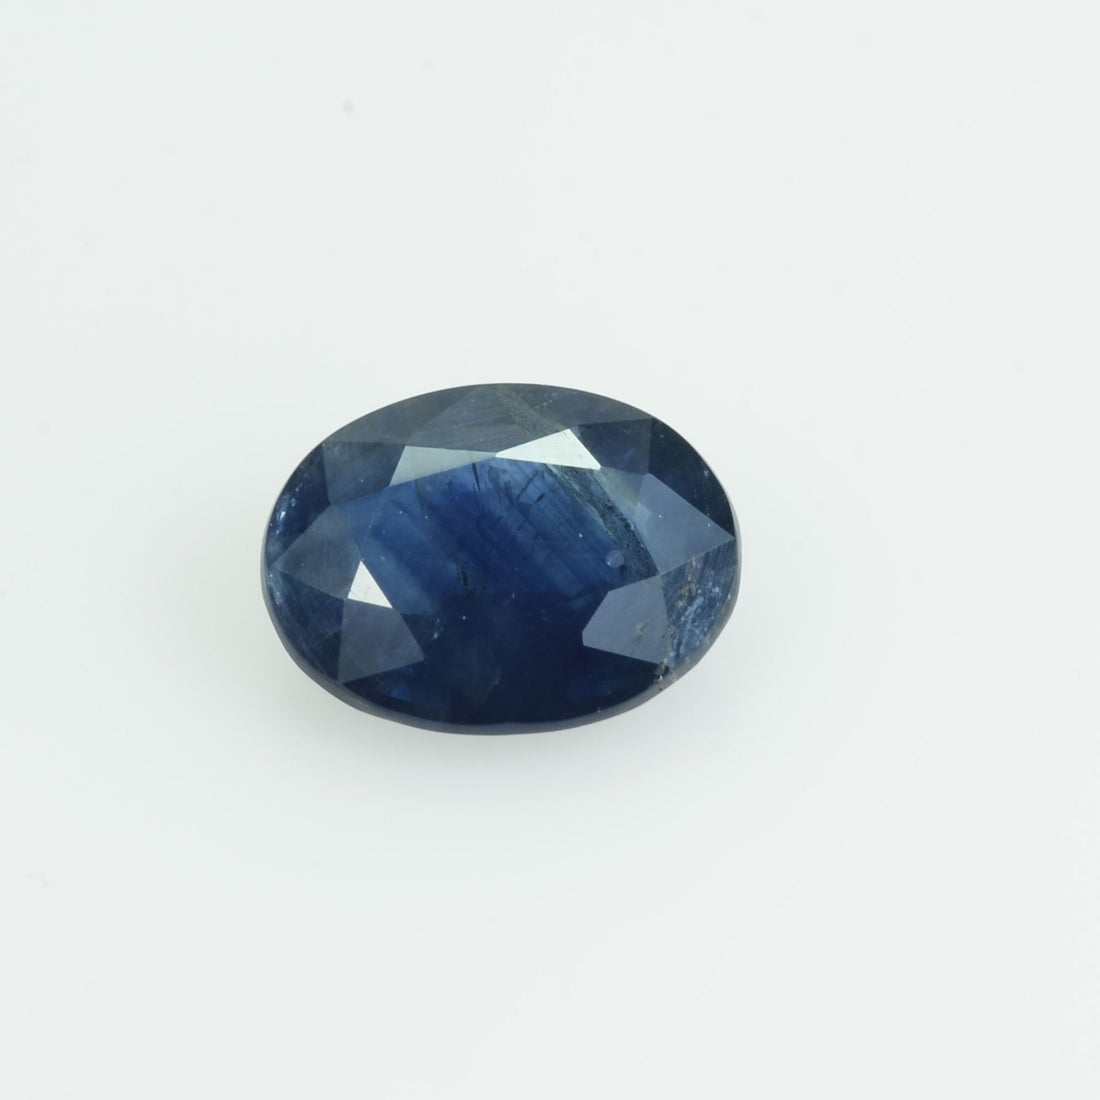 1.04 cts Natural Blue Sapphire Loose Gemstone Oval Cut